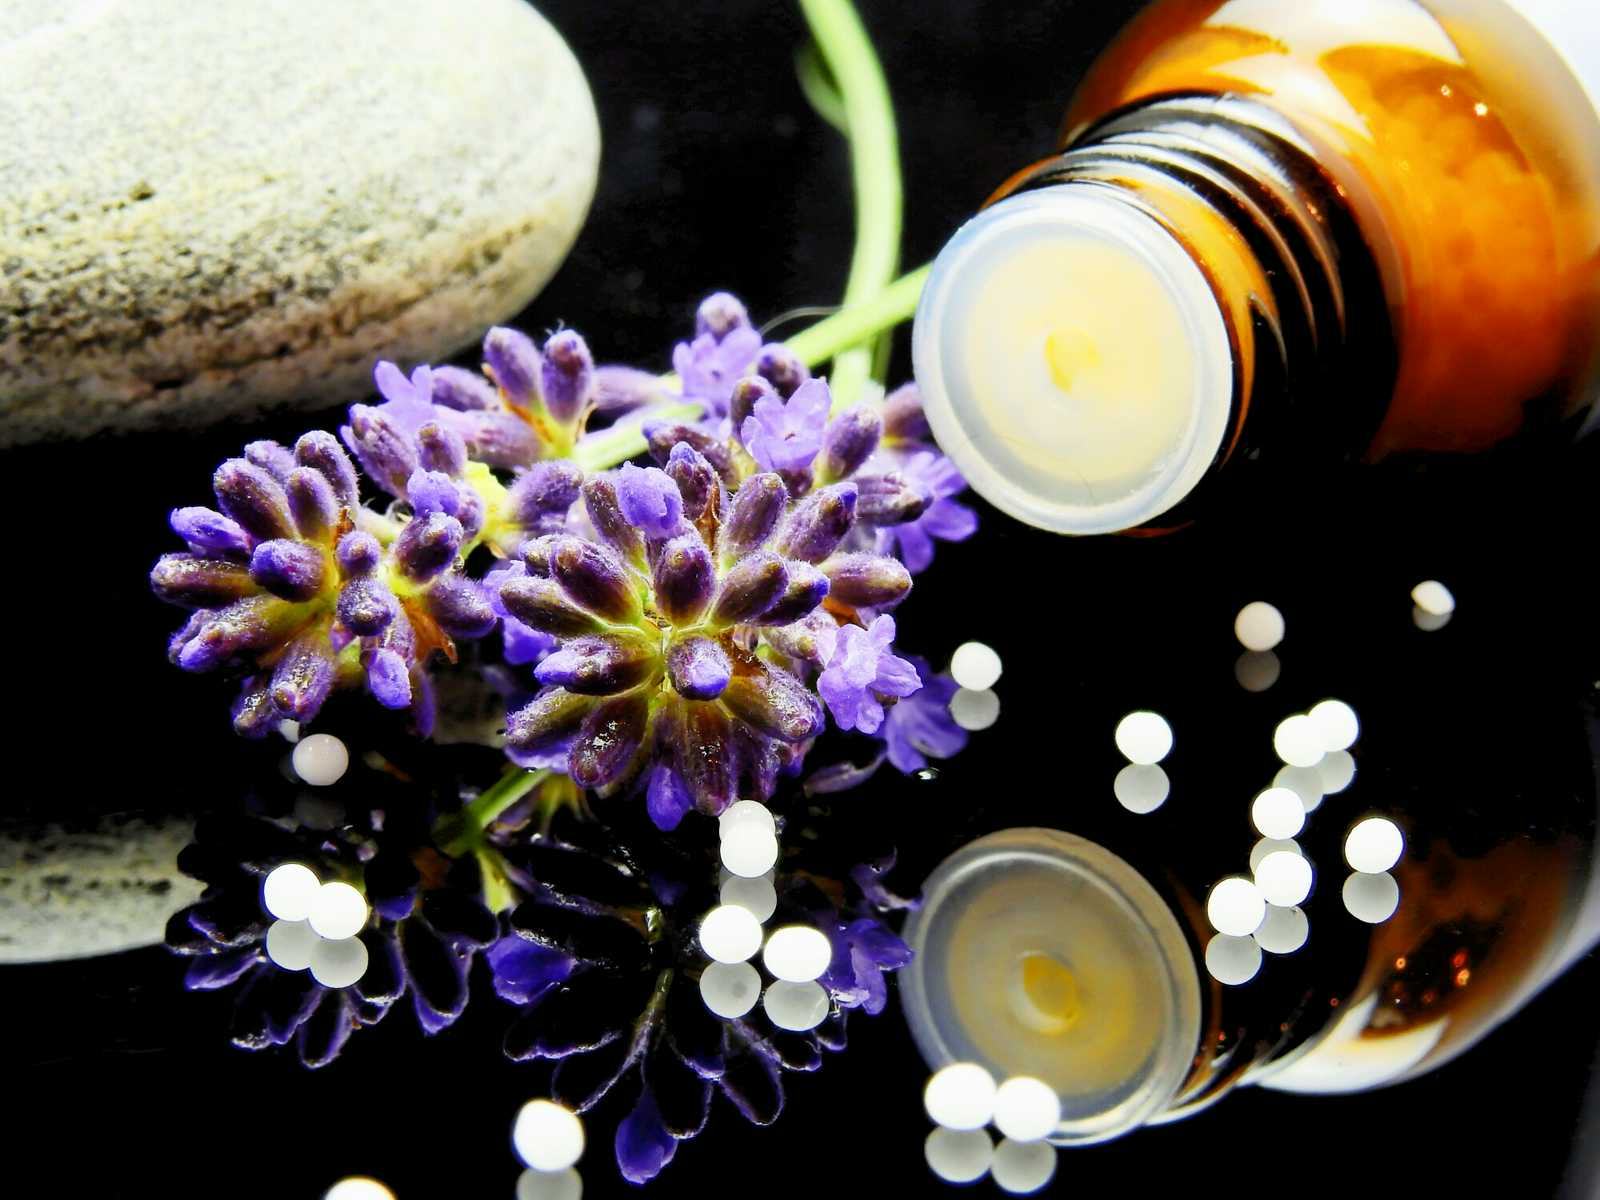 Naturopathic Medicine: A Holistic Approach to Your Health and Well Being